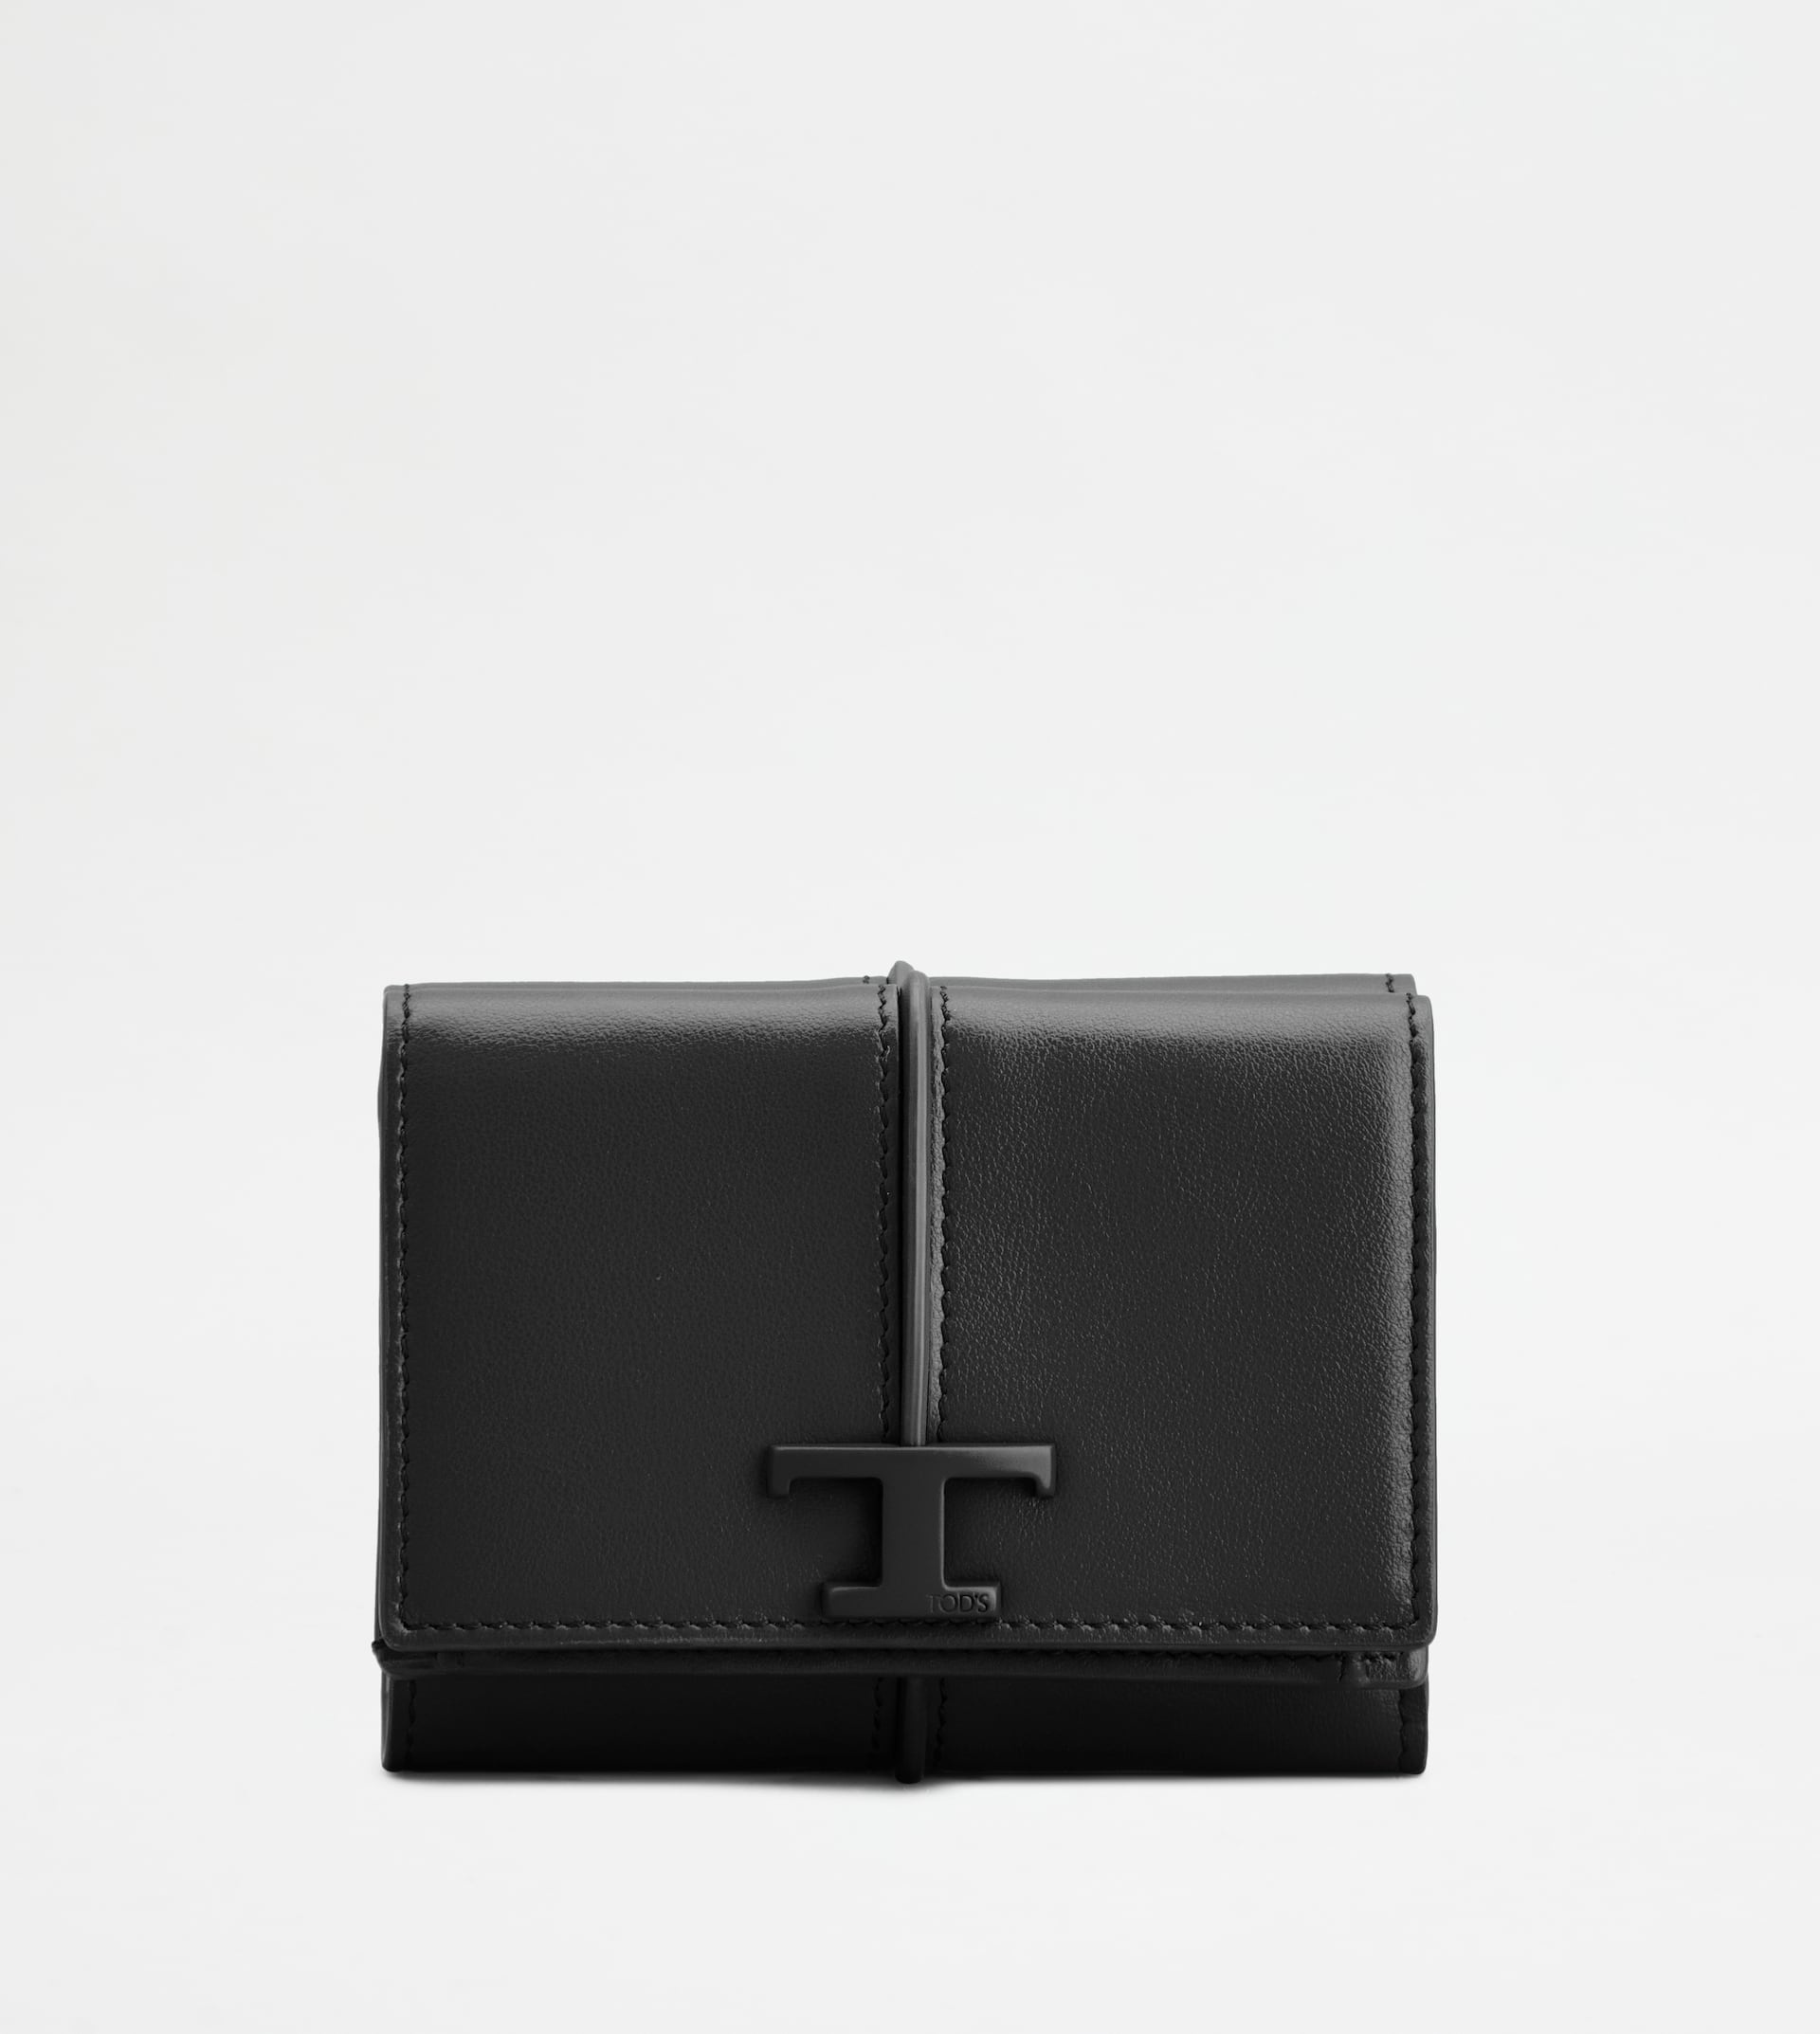 T TIMELESS WALLET IN LEATHER - BLACK - 1